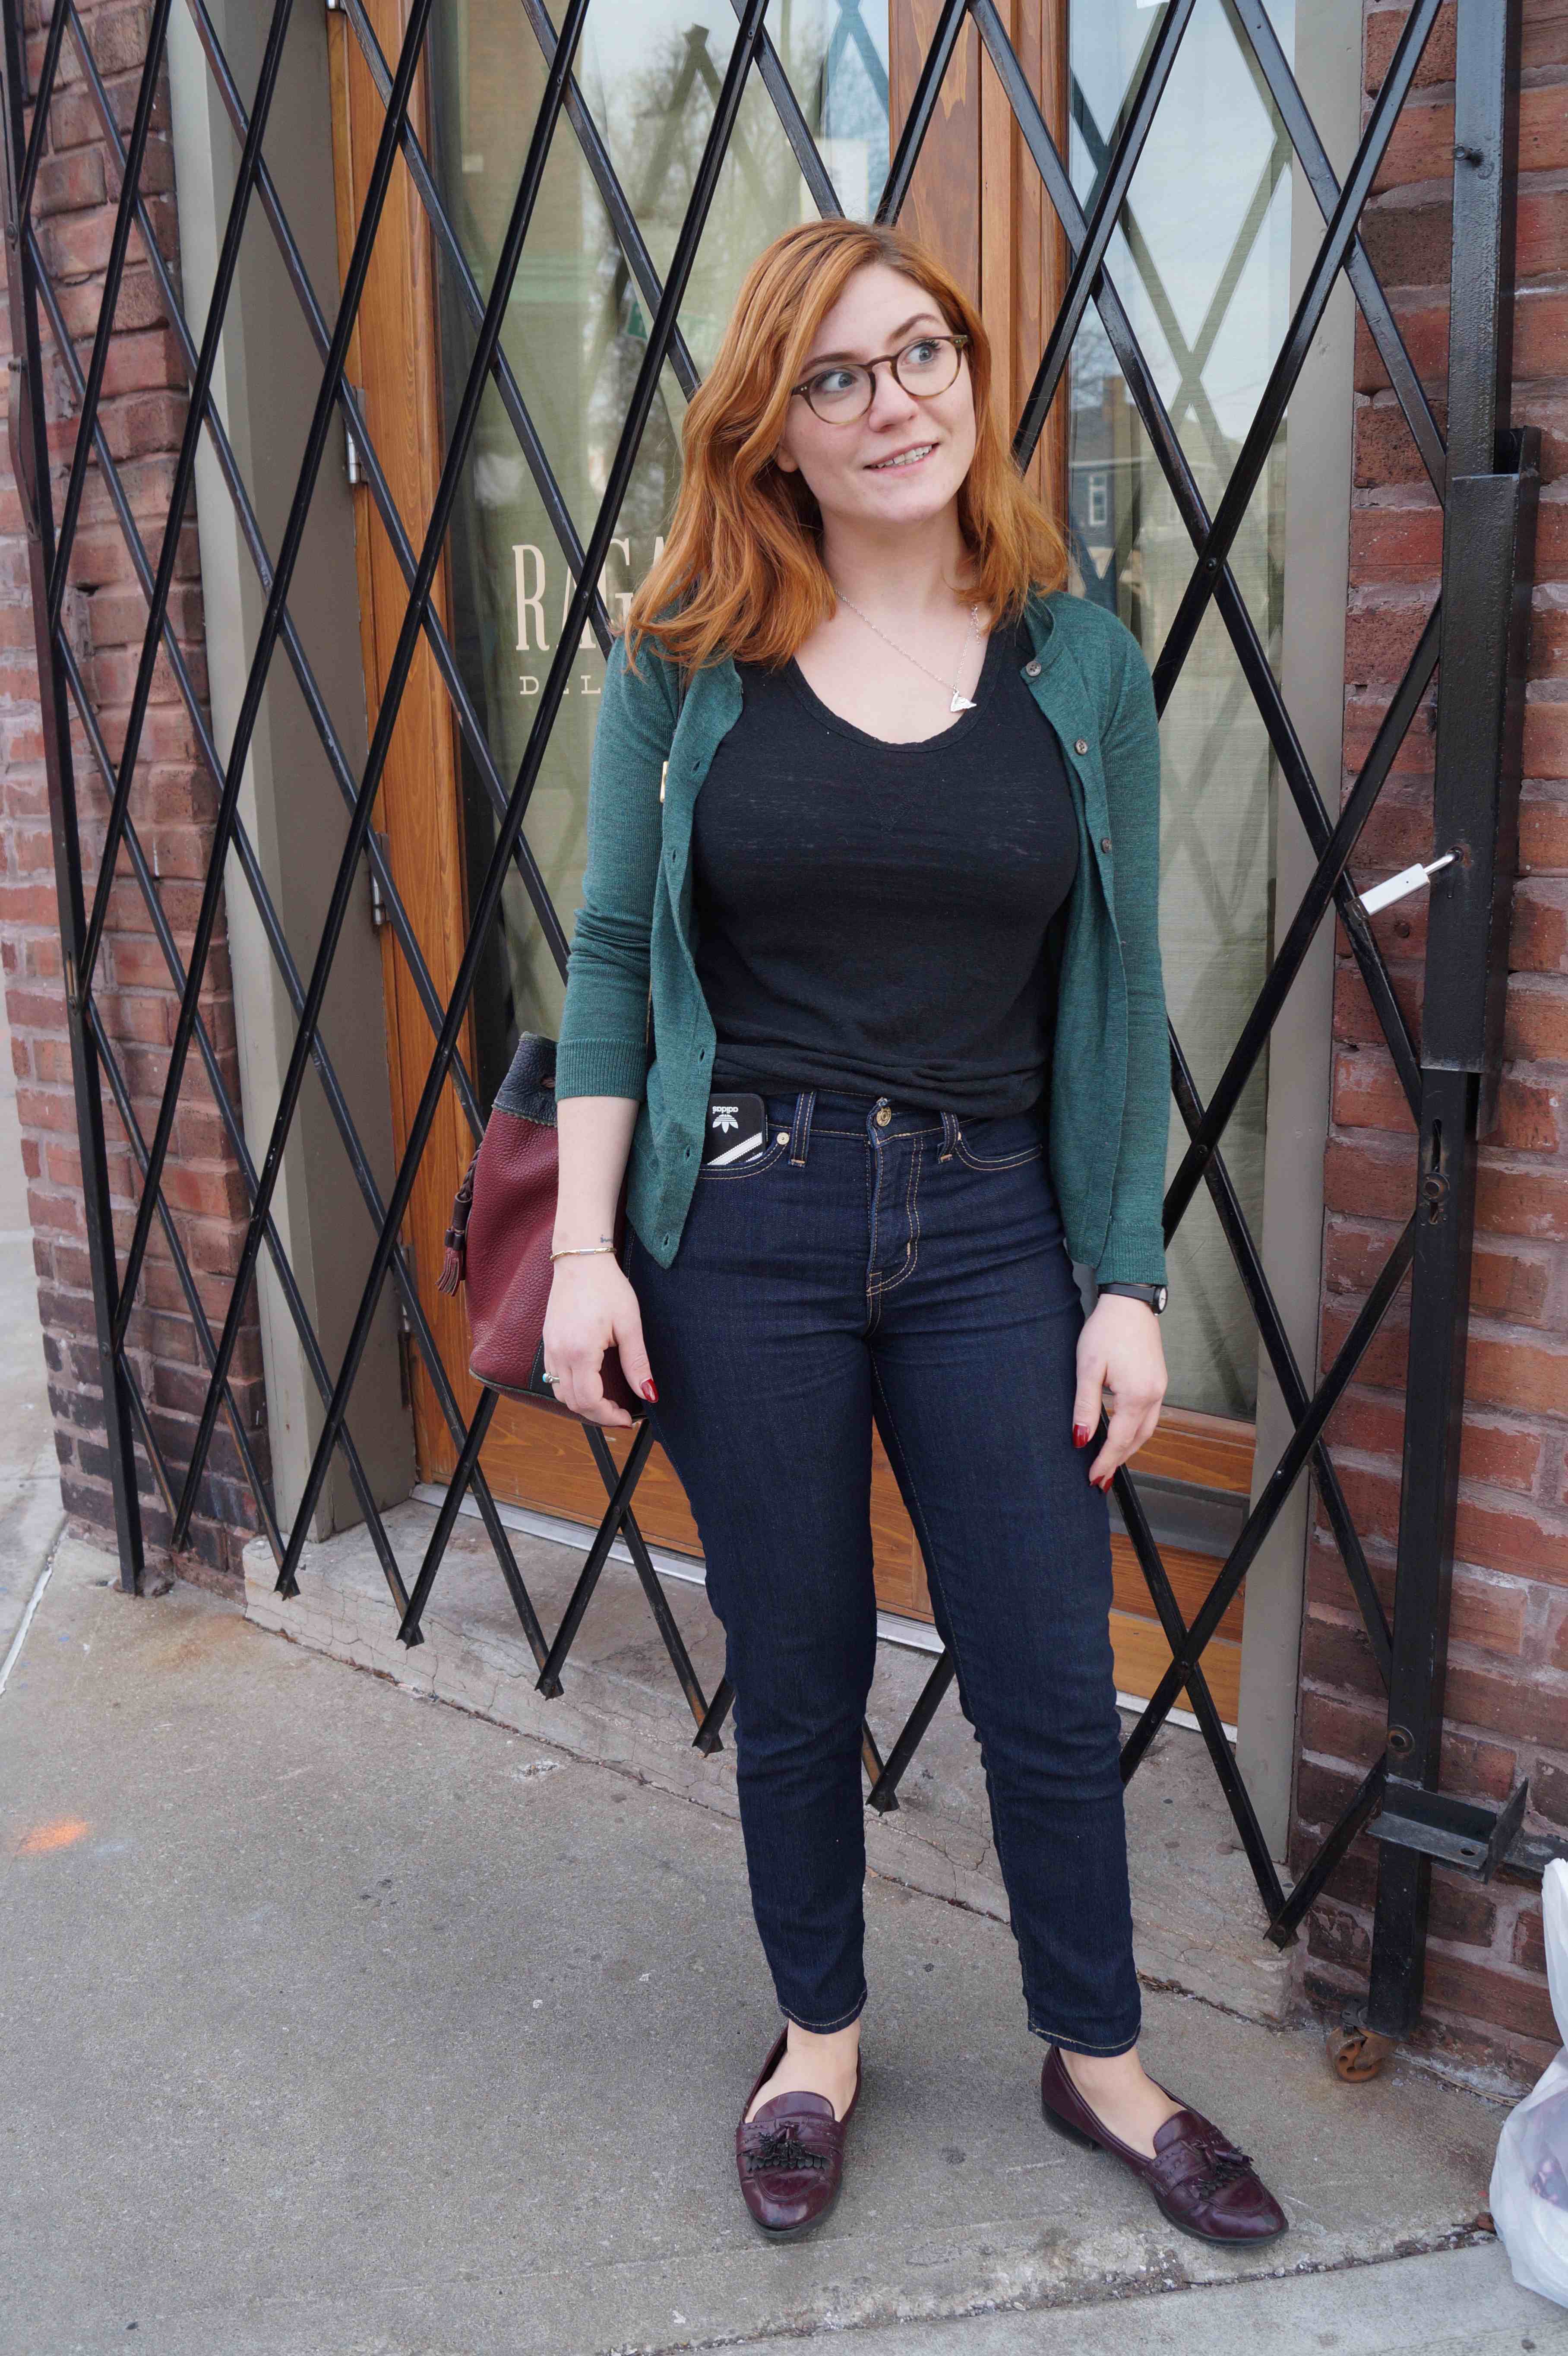 I love how this gal can so subtly, yet affectively, display her style. With her cardigan, leather loafers, and adorable glasses, she has a sort of preppy feel, which she counteracts with her jeans and relaxed tee.